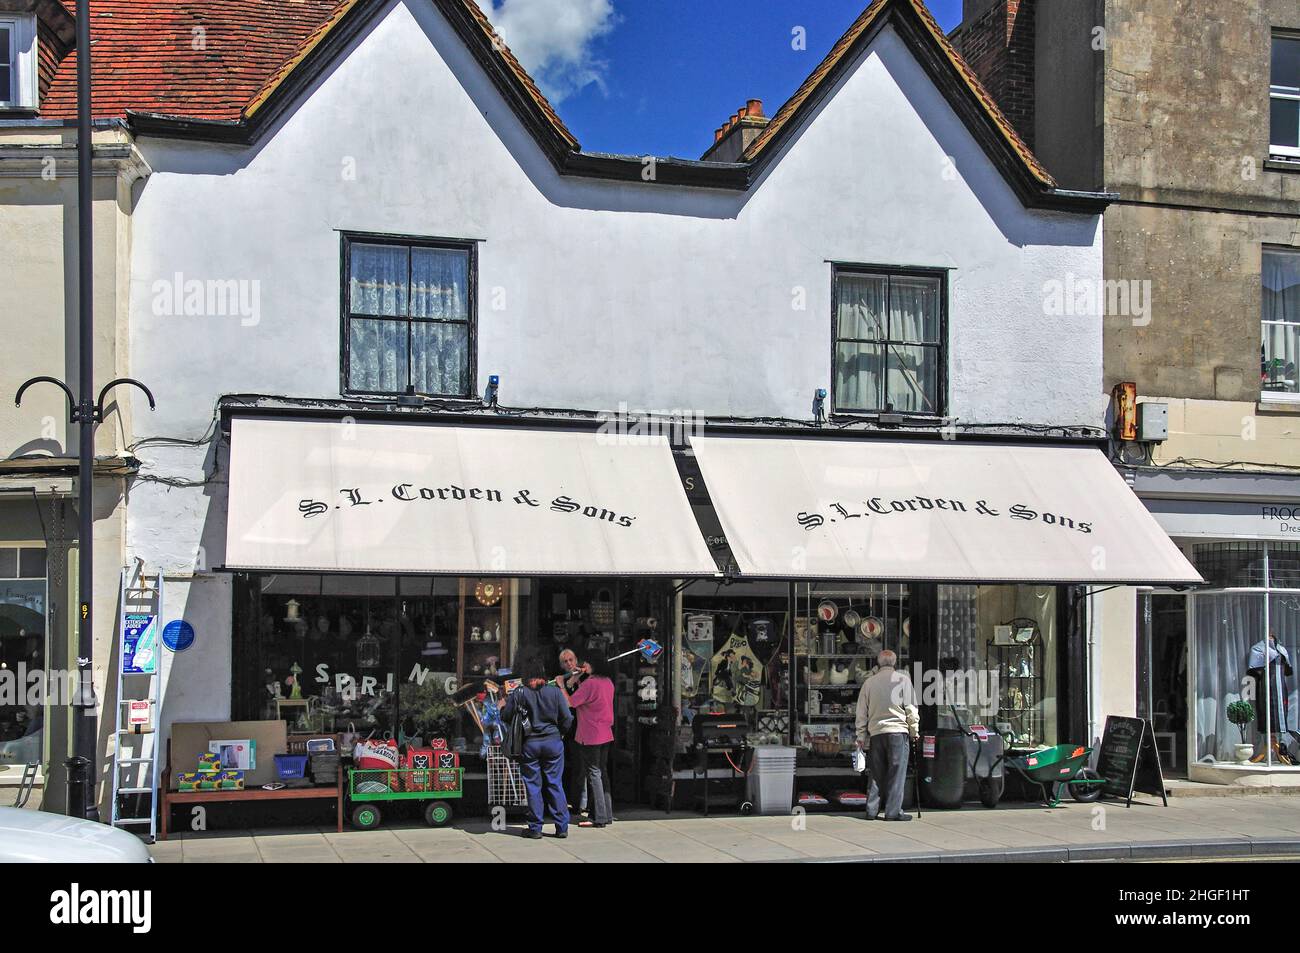 S.L.Corden & Sons Hardware Store, High Street, Warminster, Wiltshire, England, United Kingdom Stock Photo